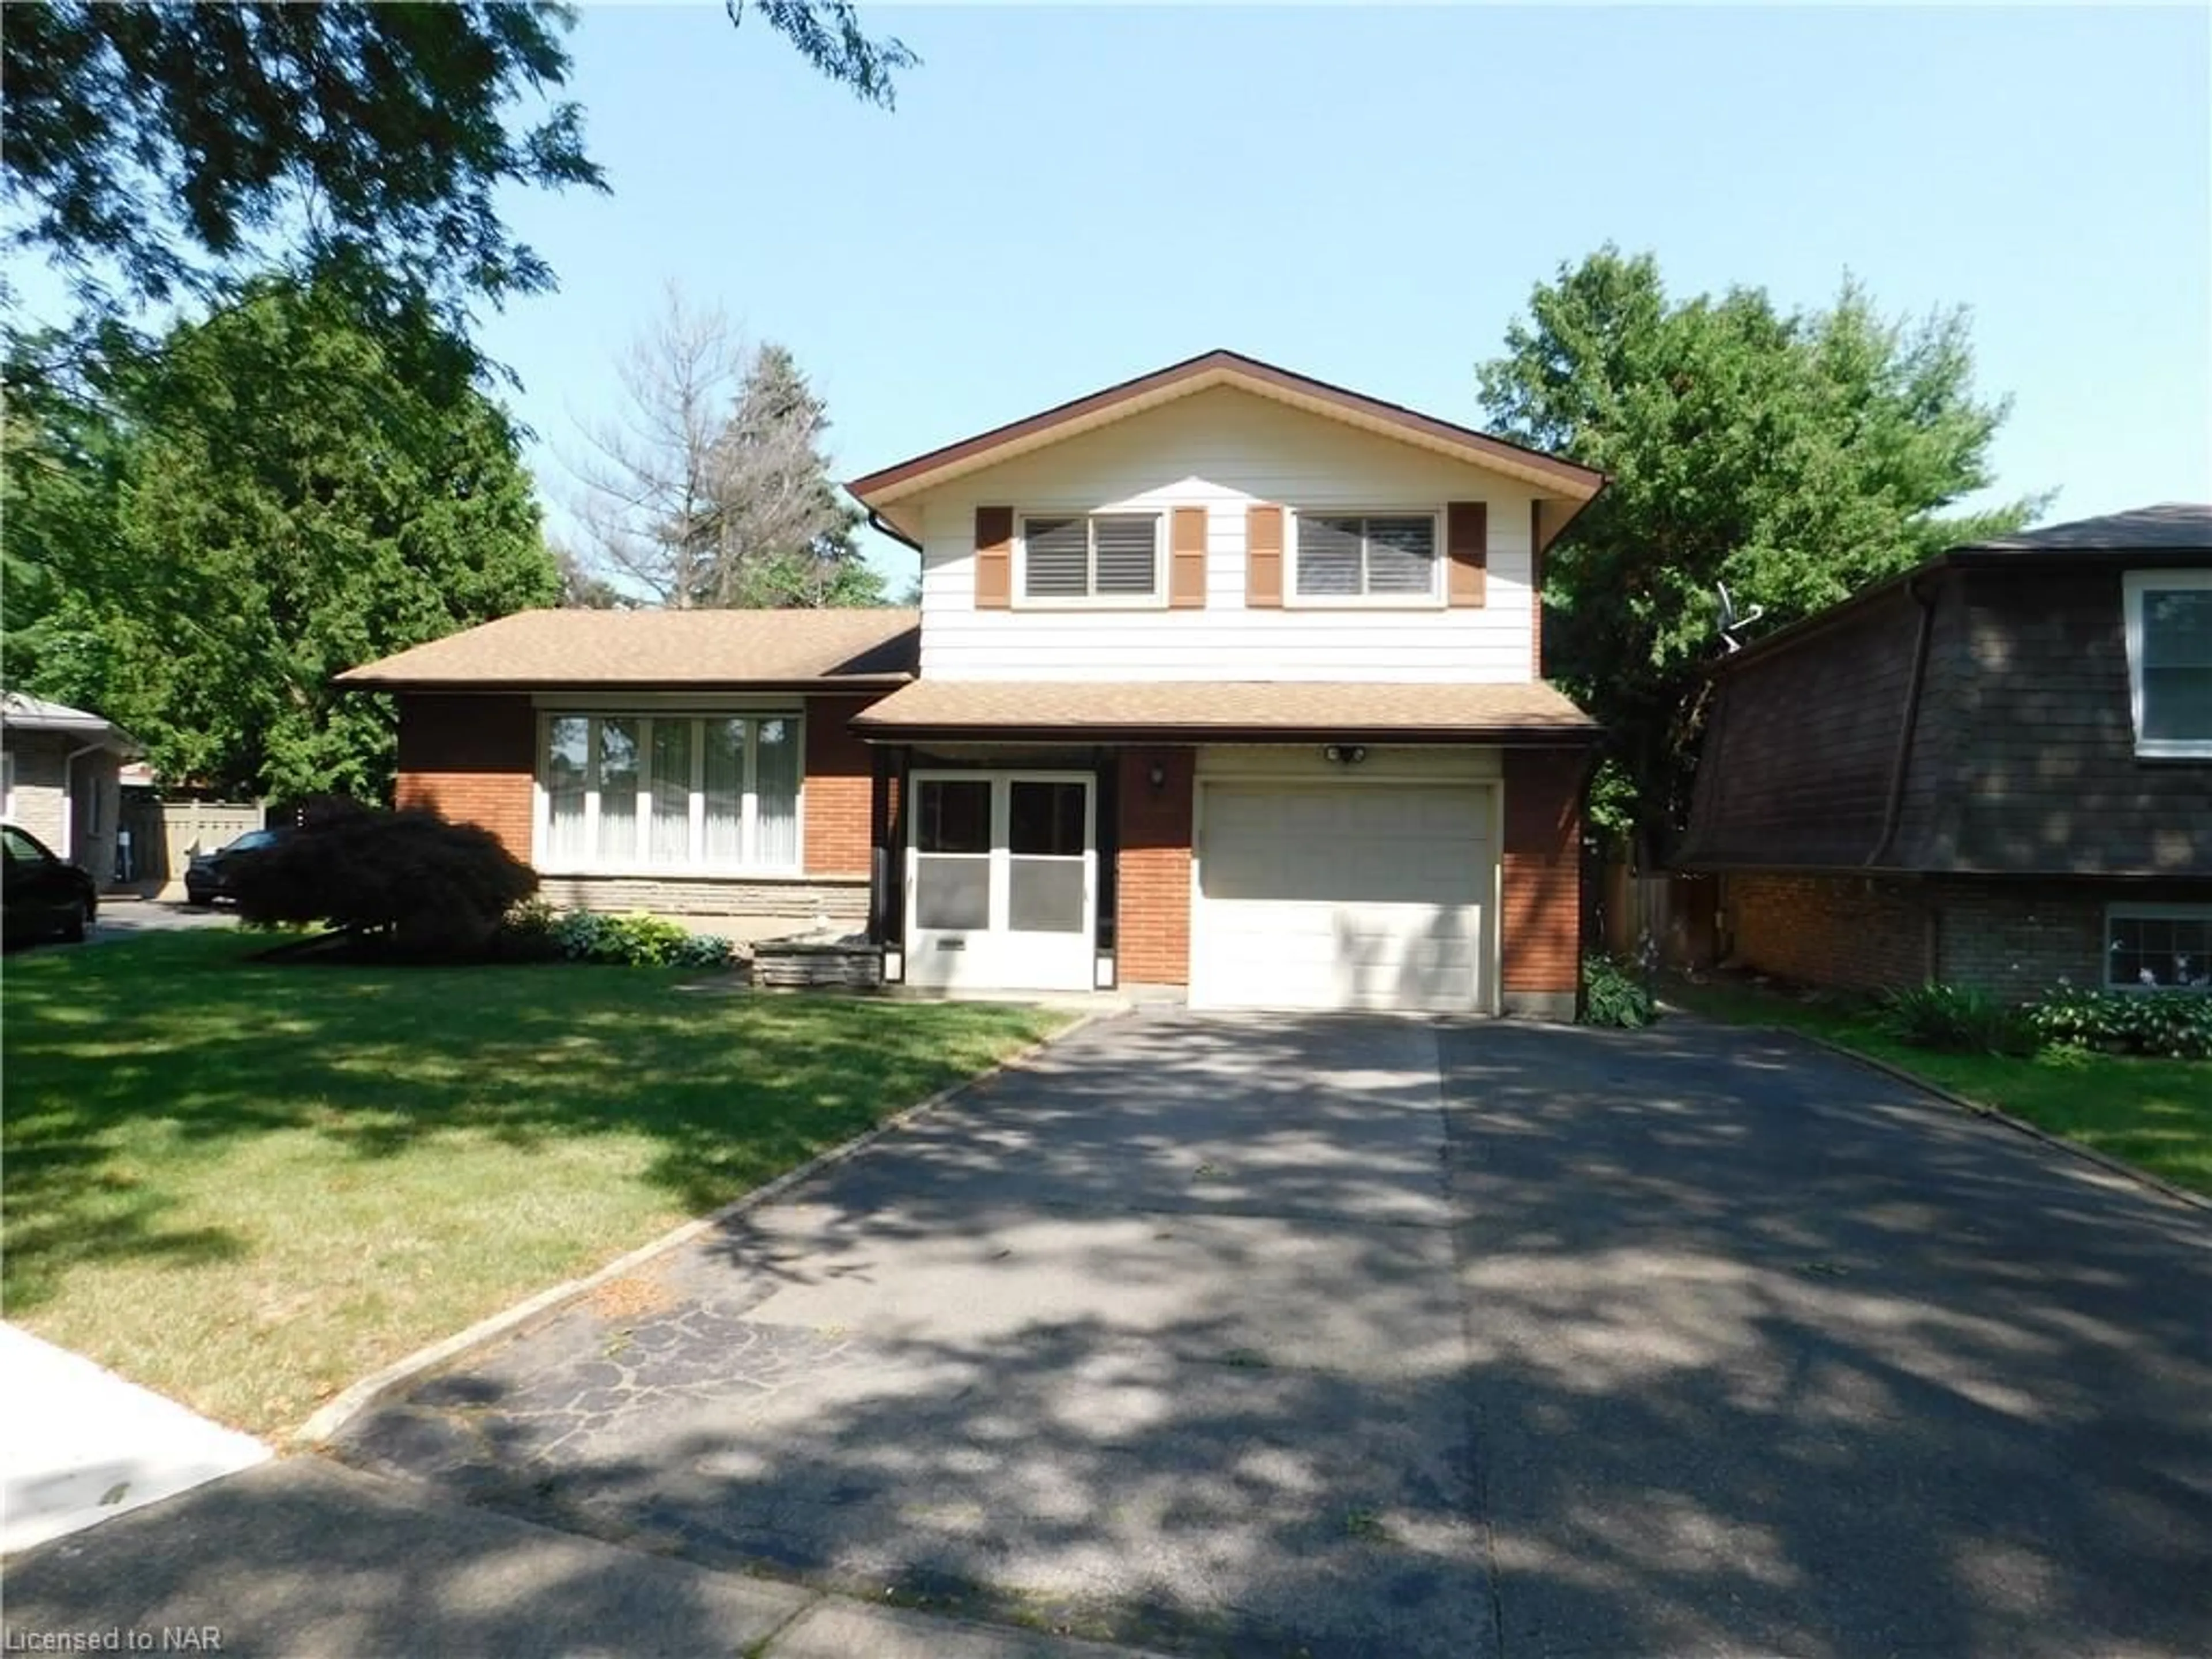 Frontside or backside of a home for 3004 Cullimore Ave, Niagara Falls Ontario L2J 2S8